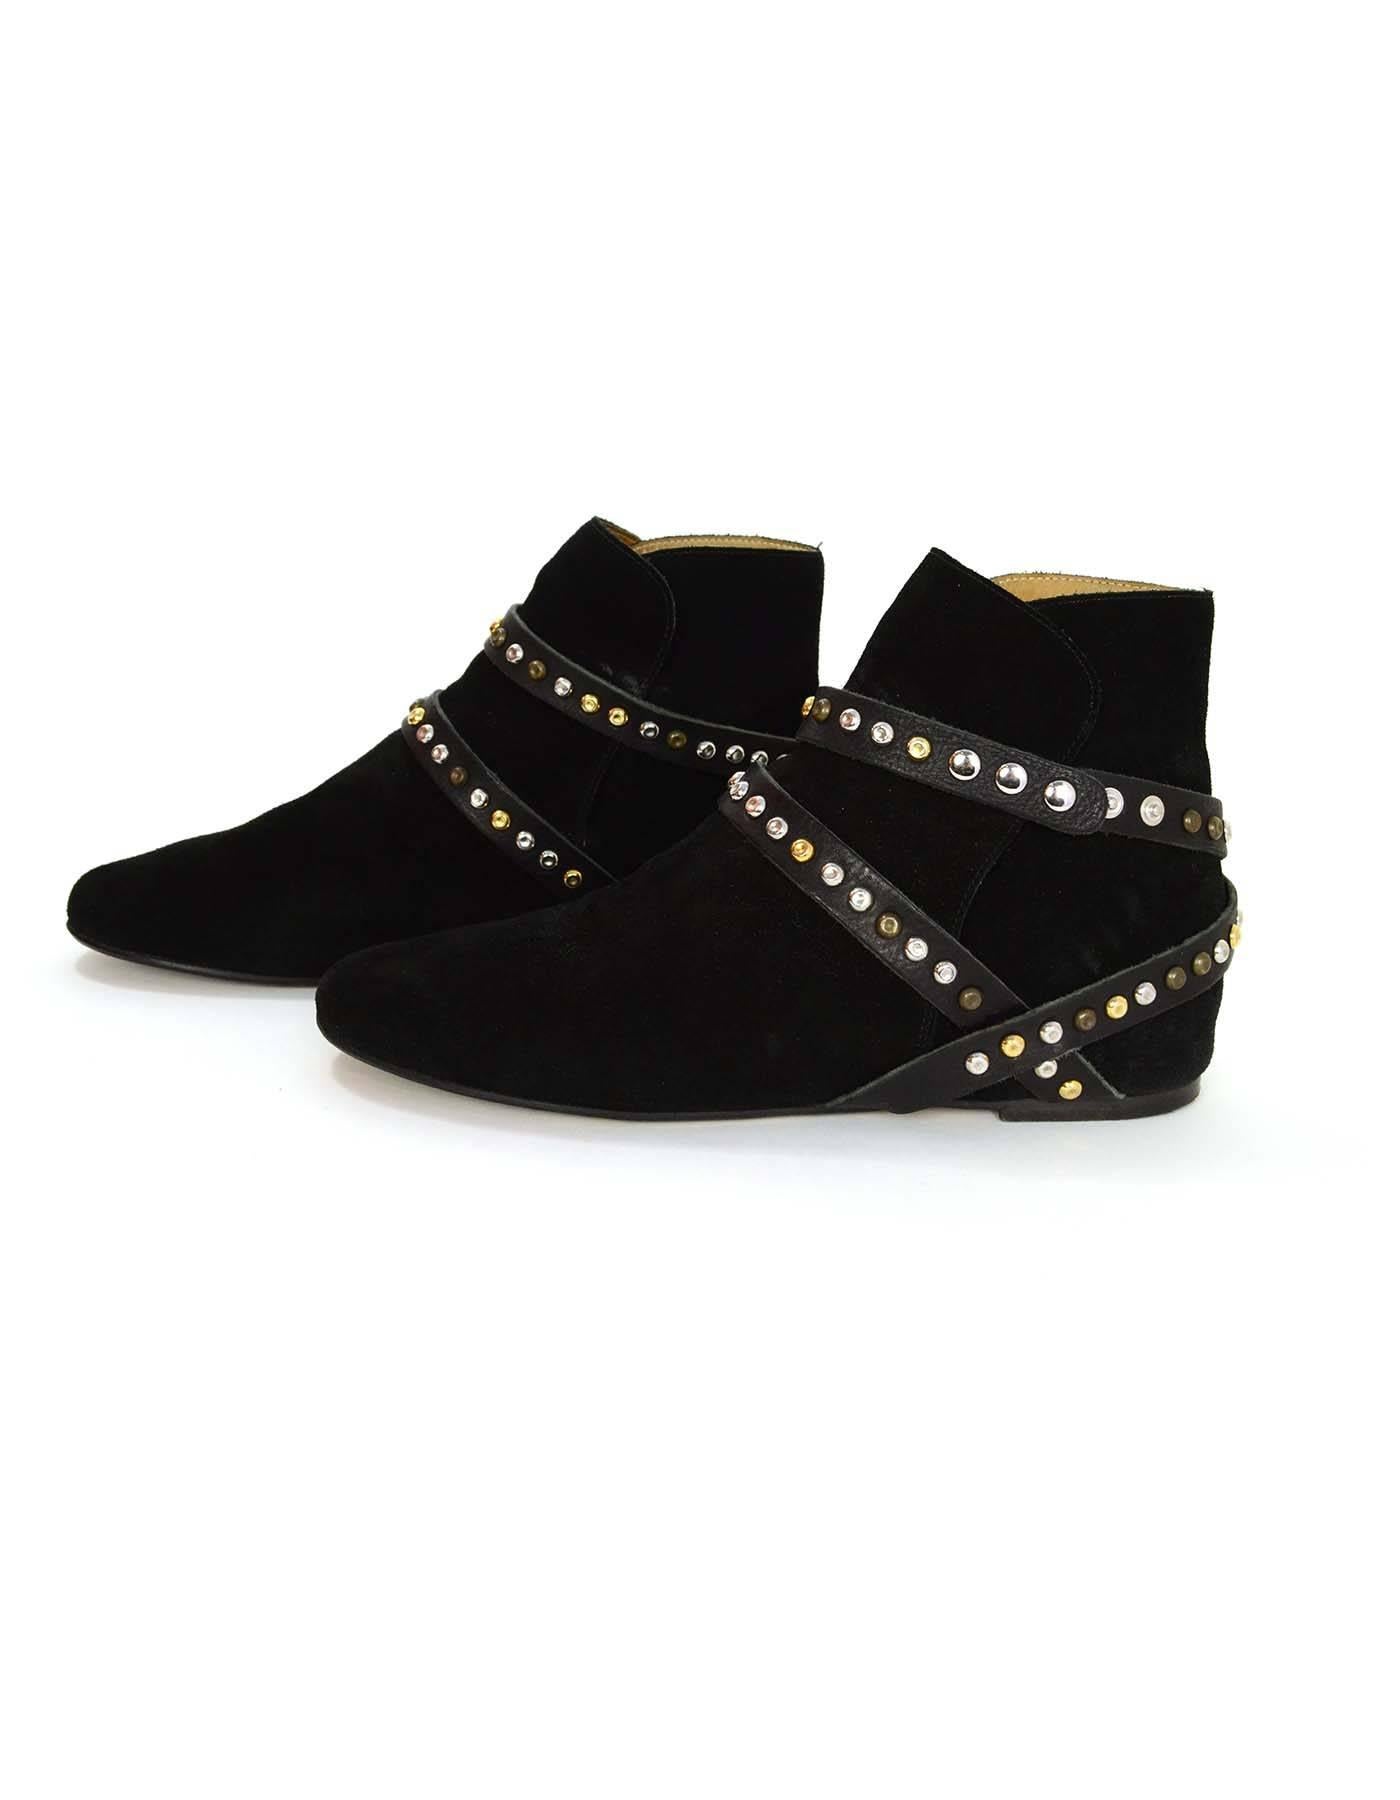 Isabel Marant Suede Ruben Ankle Boots 
Features gold, silver and copper studded wrap around leather straps
Made In: Italy
Color: Black
Materials: Suede, leather and metal
Closure/Opening: Pull on
Sole Stamp: Isabel Marant Etoile Made in Italy